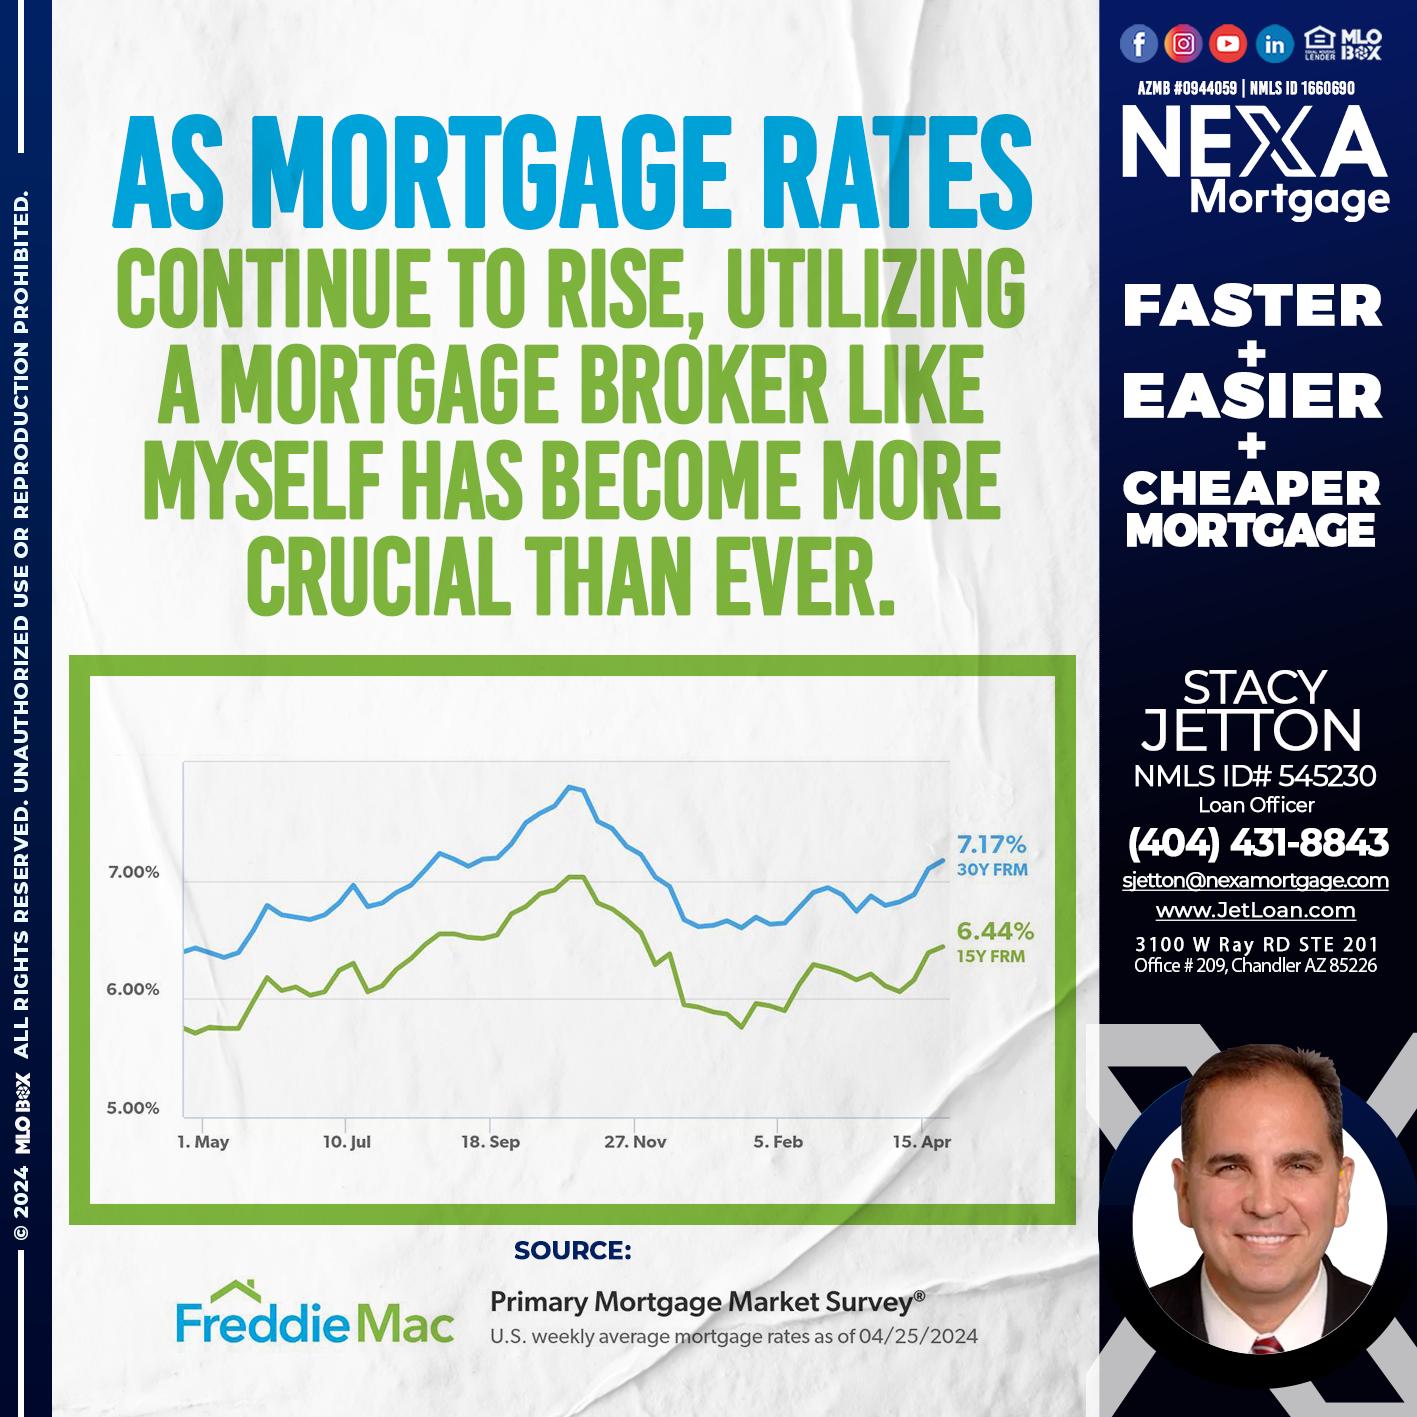 mortgage rates - Stacy Jetton -Sr. Mortgage Broker